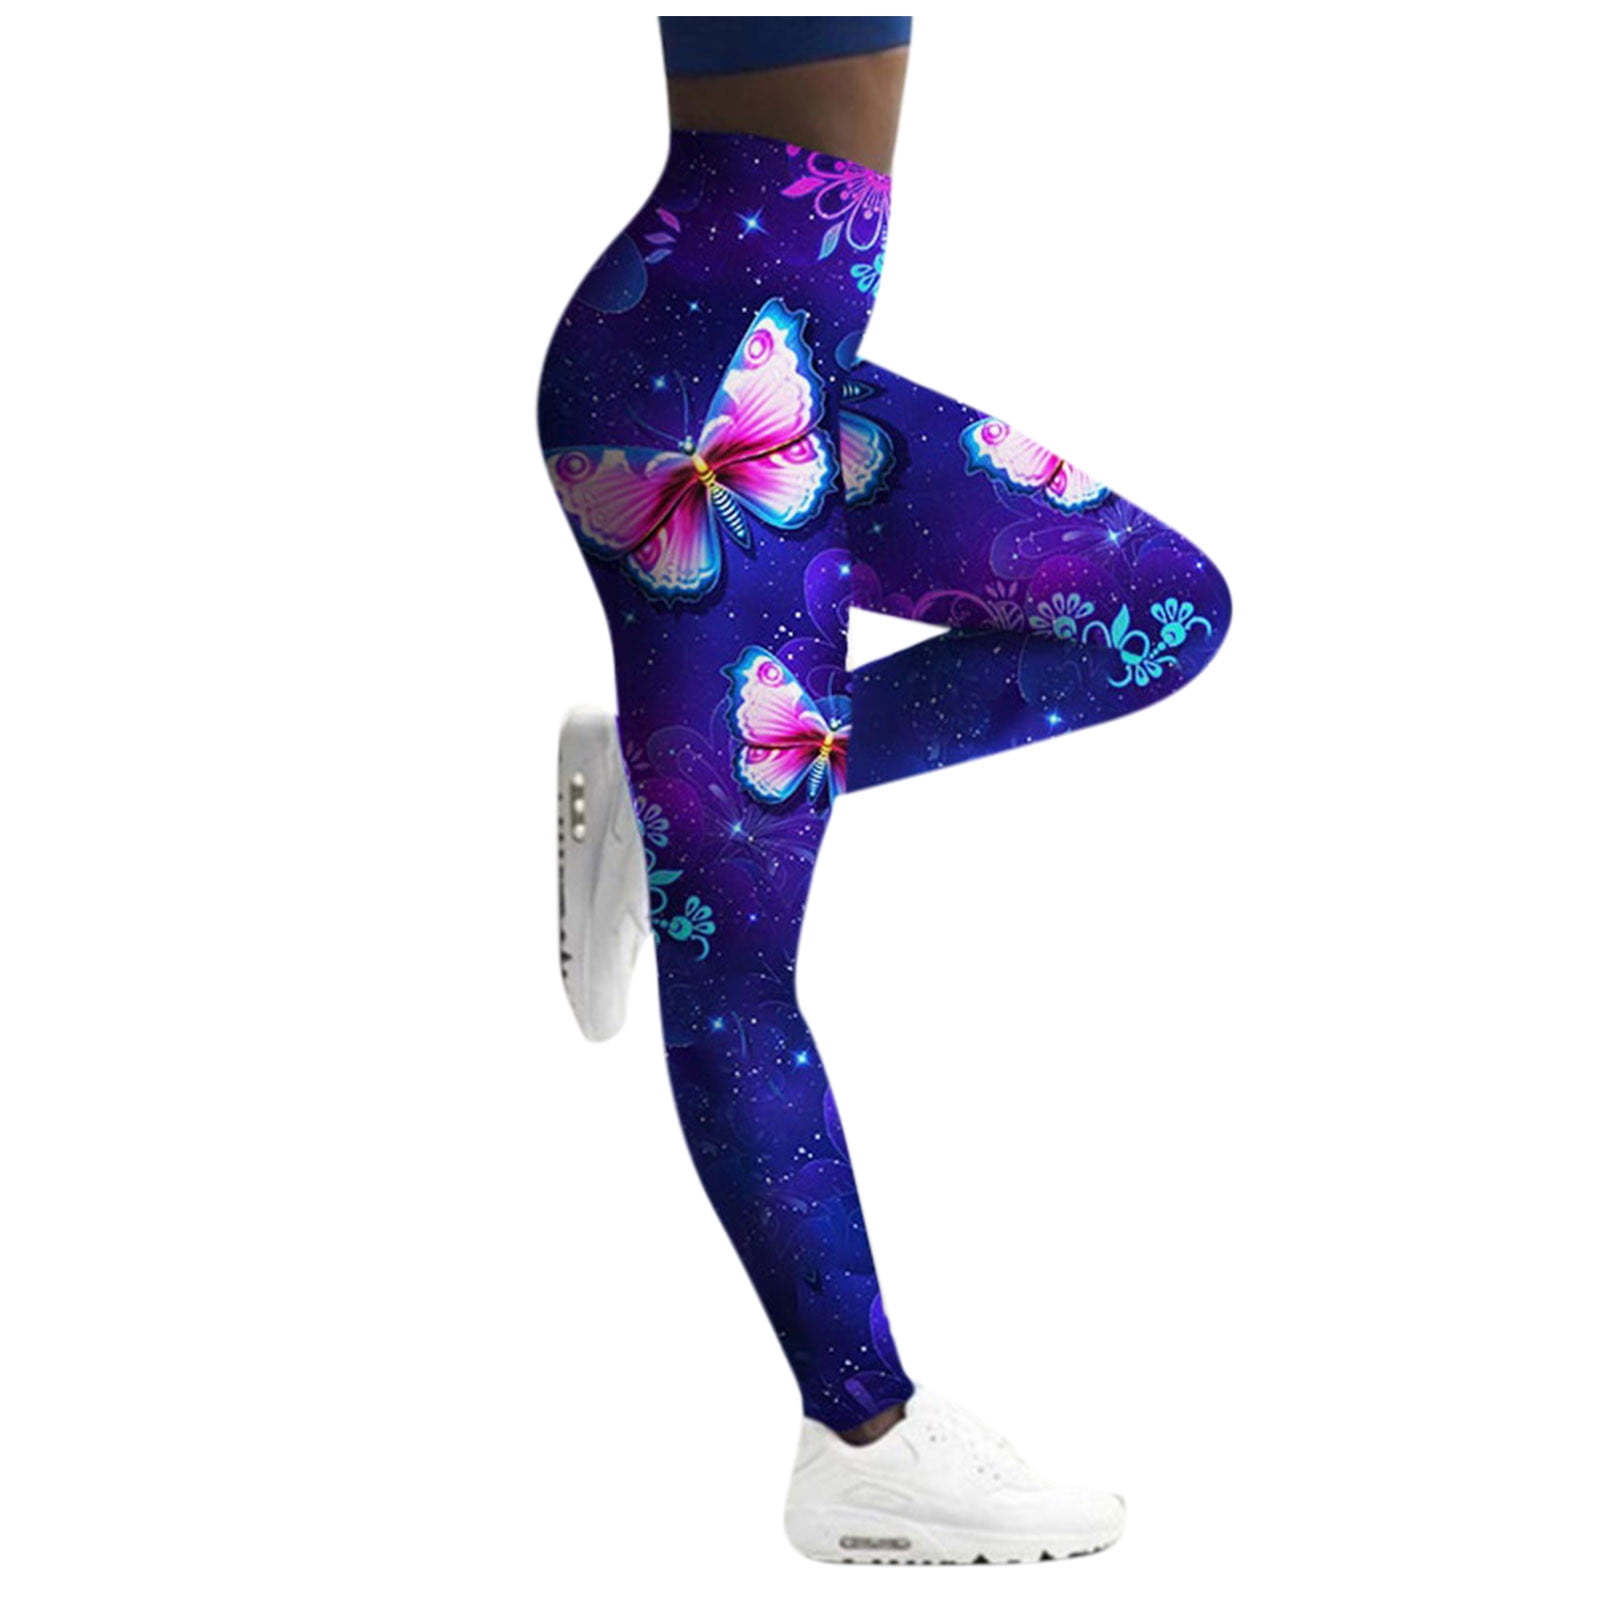 Yoga Pants For Women With Pockets Trendy Women Printed Yoga Pants